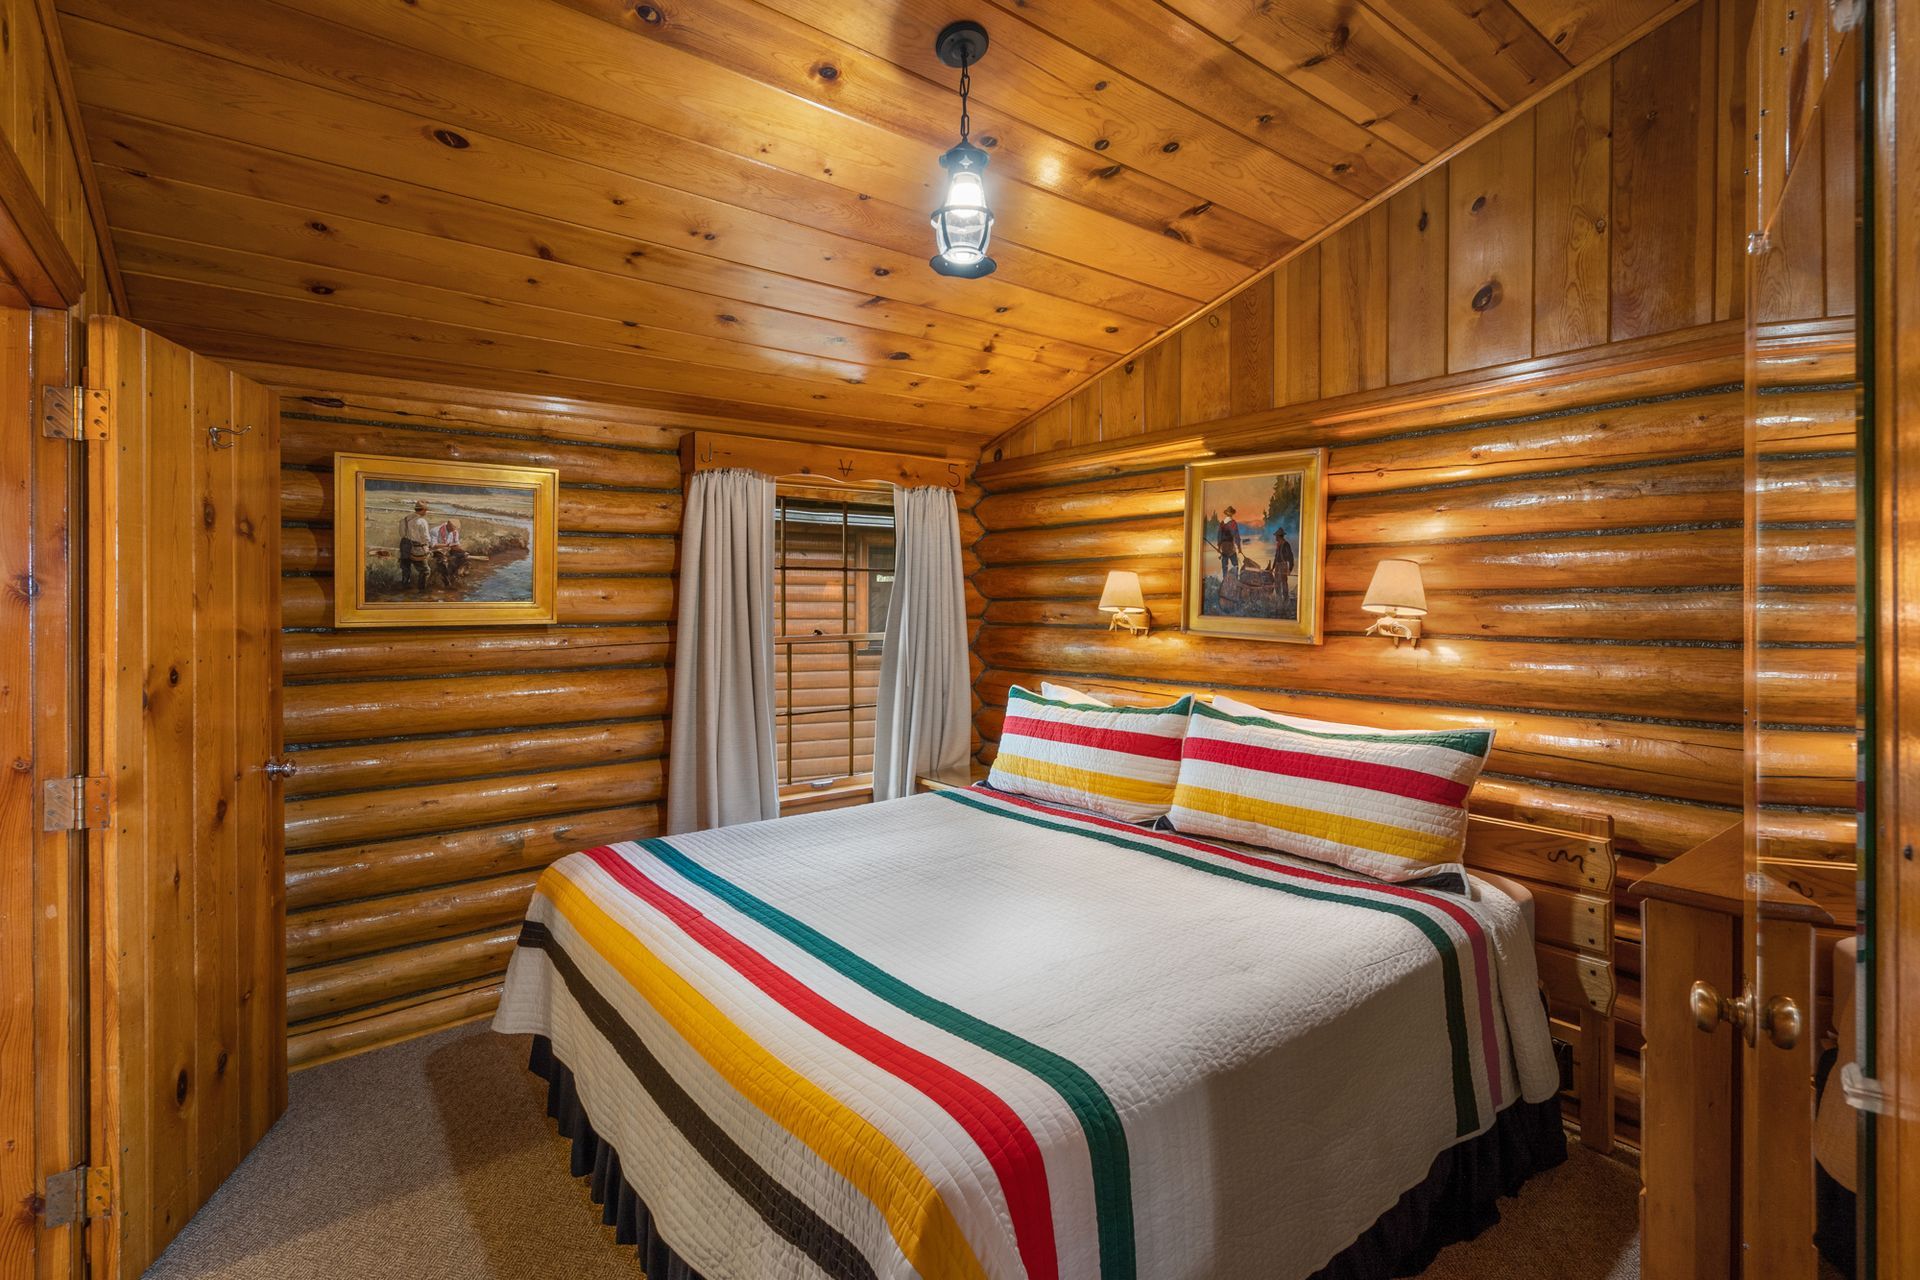 A bedroom in a log cabin with a king size bed and a striped blanket.